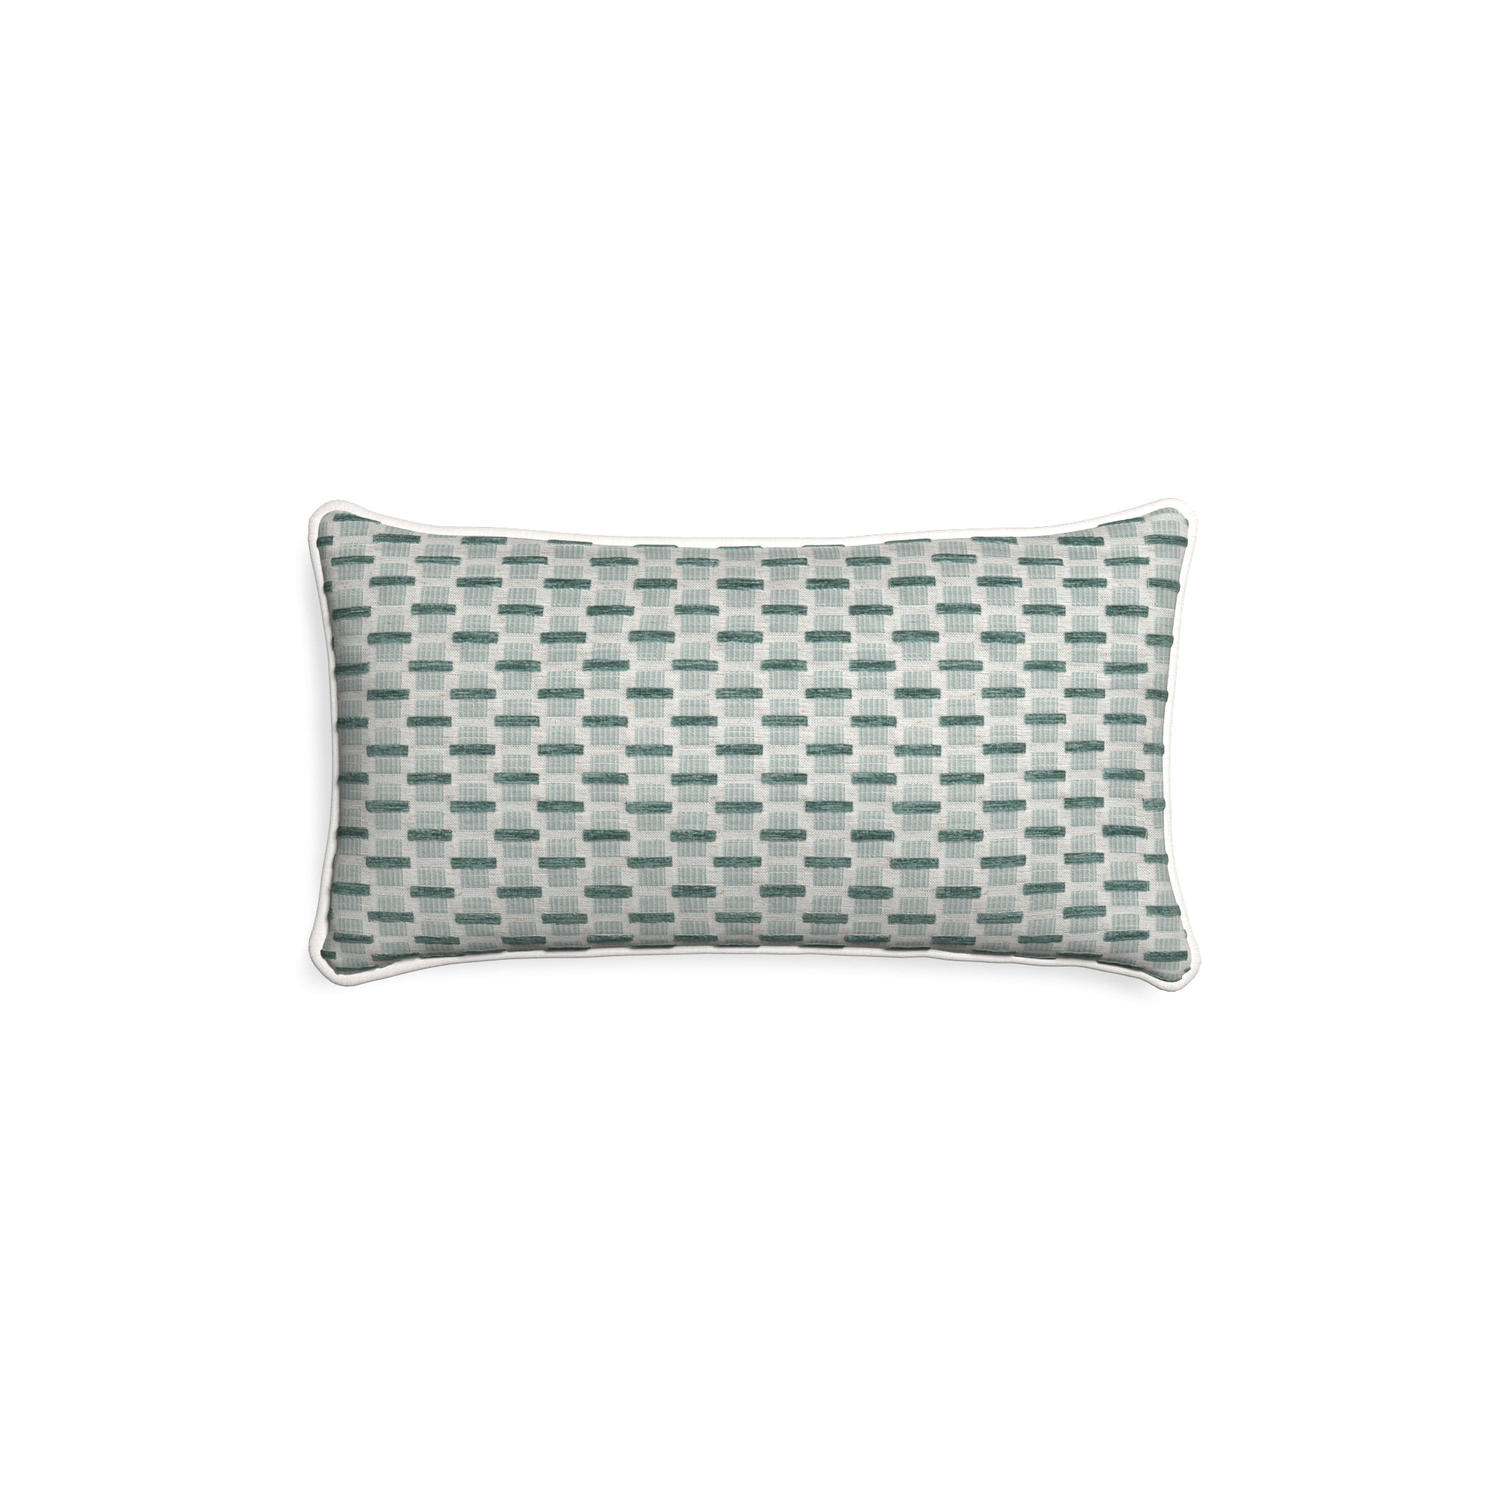 Petite-lumbar willow mint custom green geometric chenillepillow with snow piping on white background